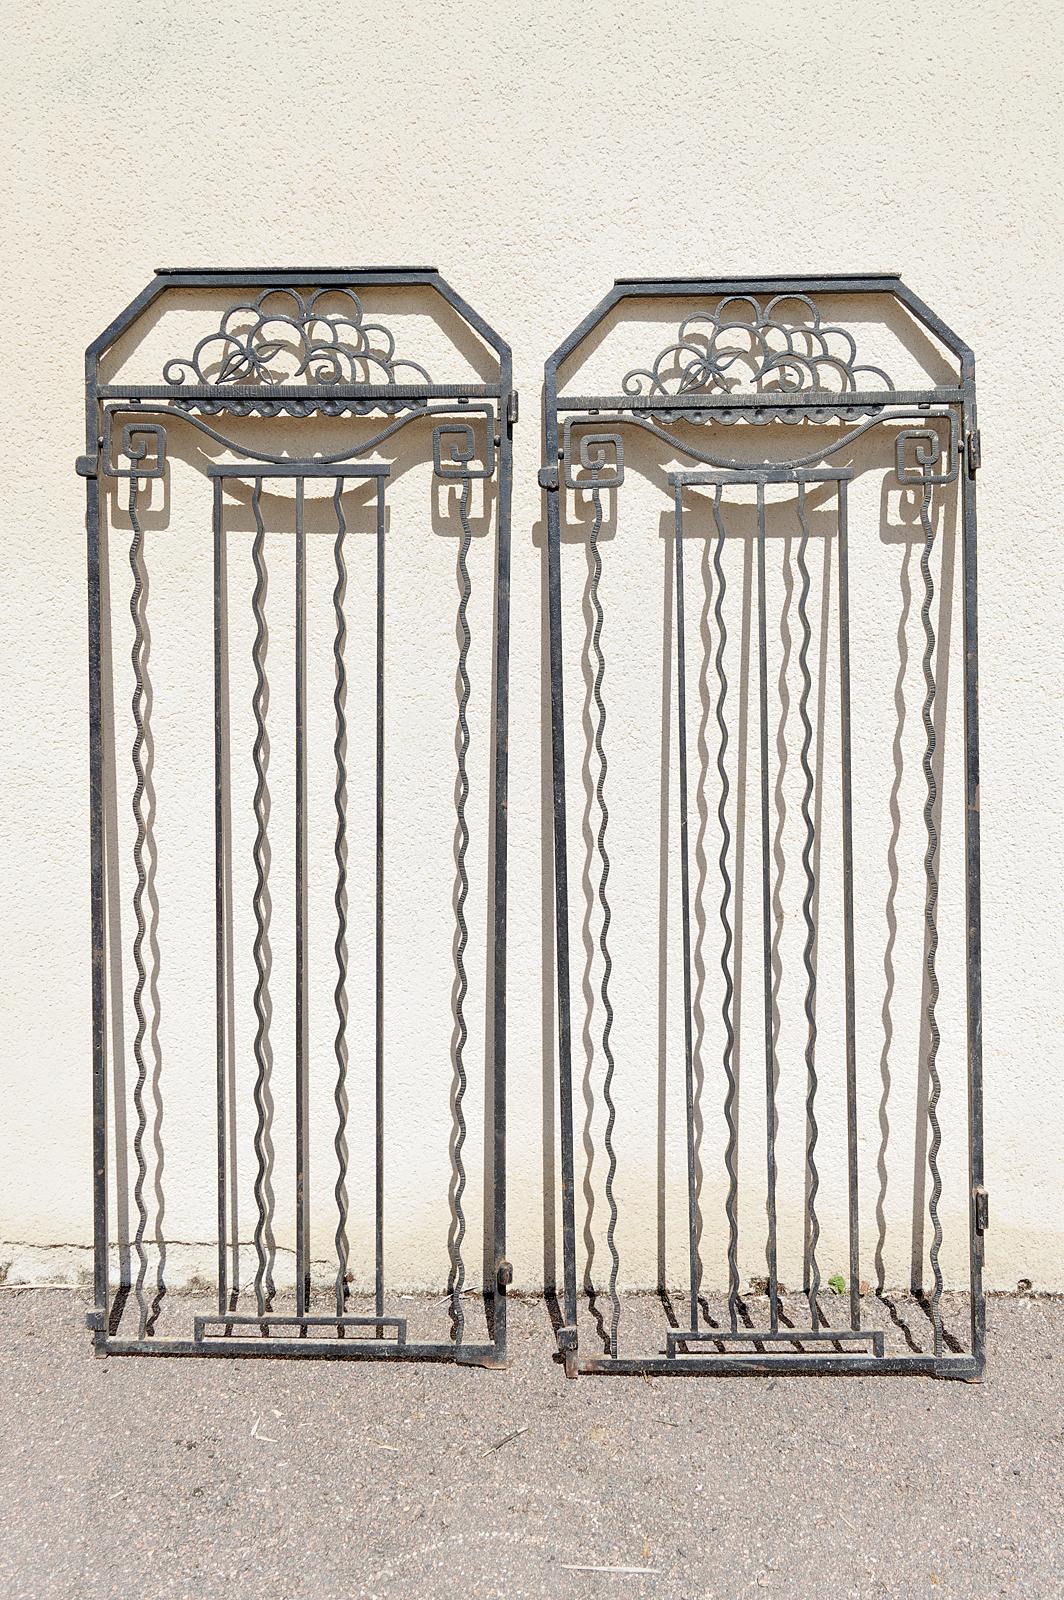 Old elevator doors/grids.

In good general condition, some traces of use and oxidation

France, Art Deco, circa 1925

Fruit basket at the top

Dimensions:
height 183 cm
width 72 cm
depth 8 cm

Weight: +/- 50/60kg for each door